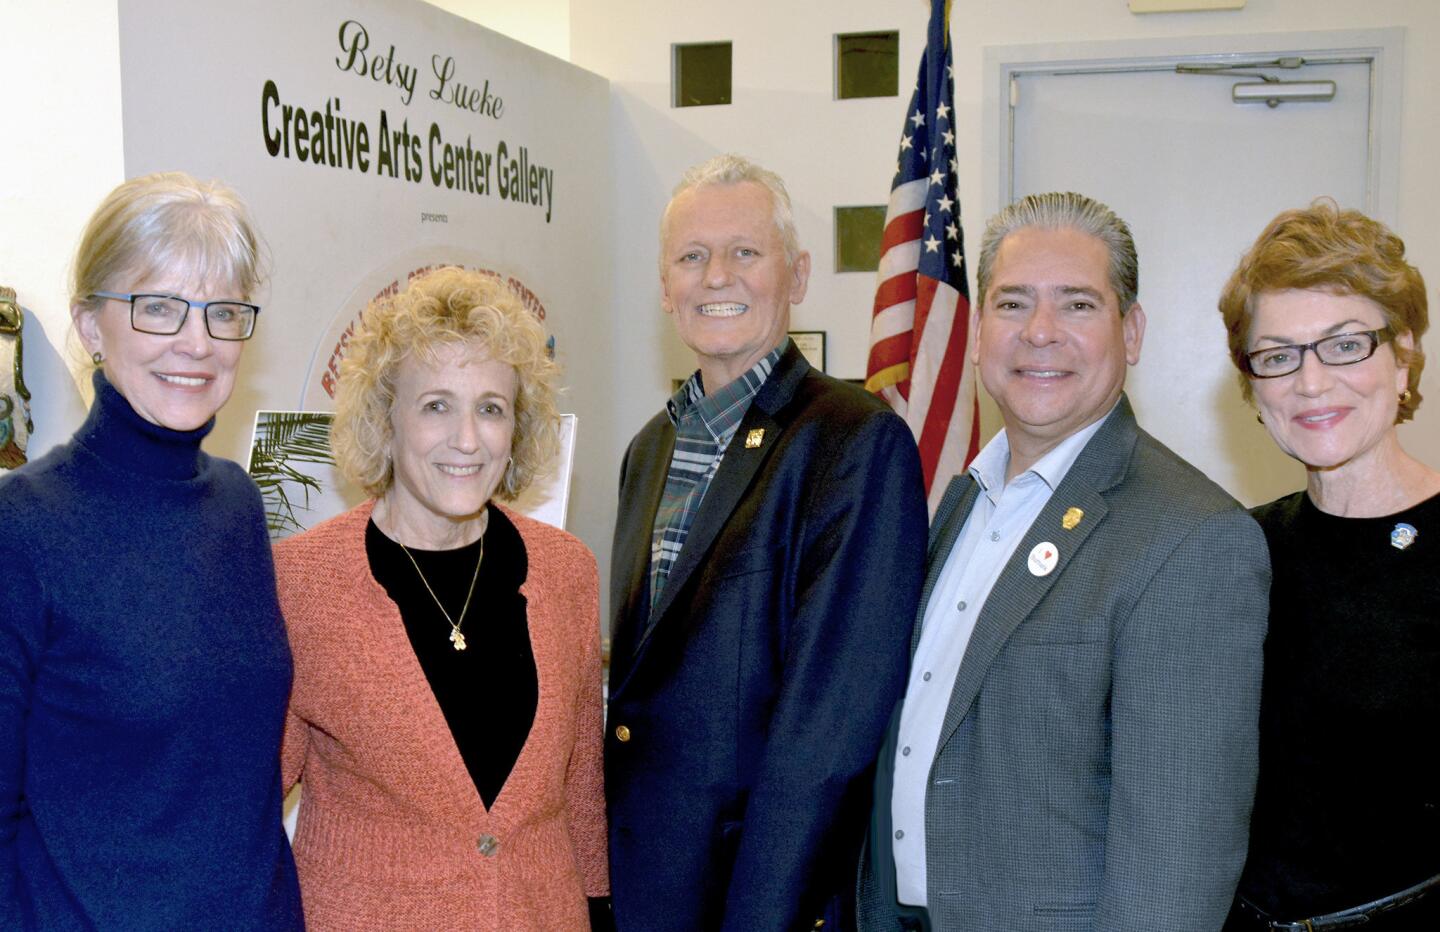 Betsy Lueke's daughter Linda Oseransky, second from left, with city council members Emily Gabel-Luddy, from left, Mayor Will Rogers, Bob Frutos and Sharon Springer at the newly named Betsy Lueke Creative Arts Center and Gallery.